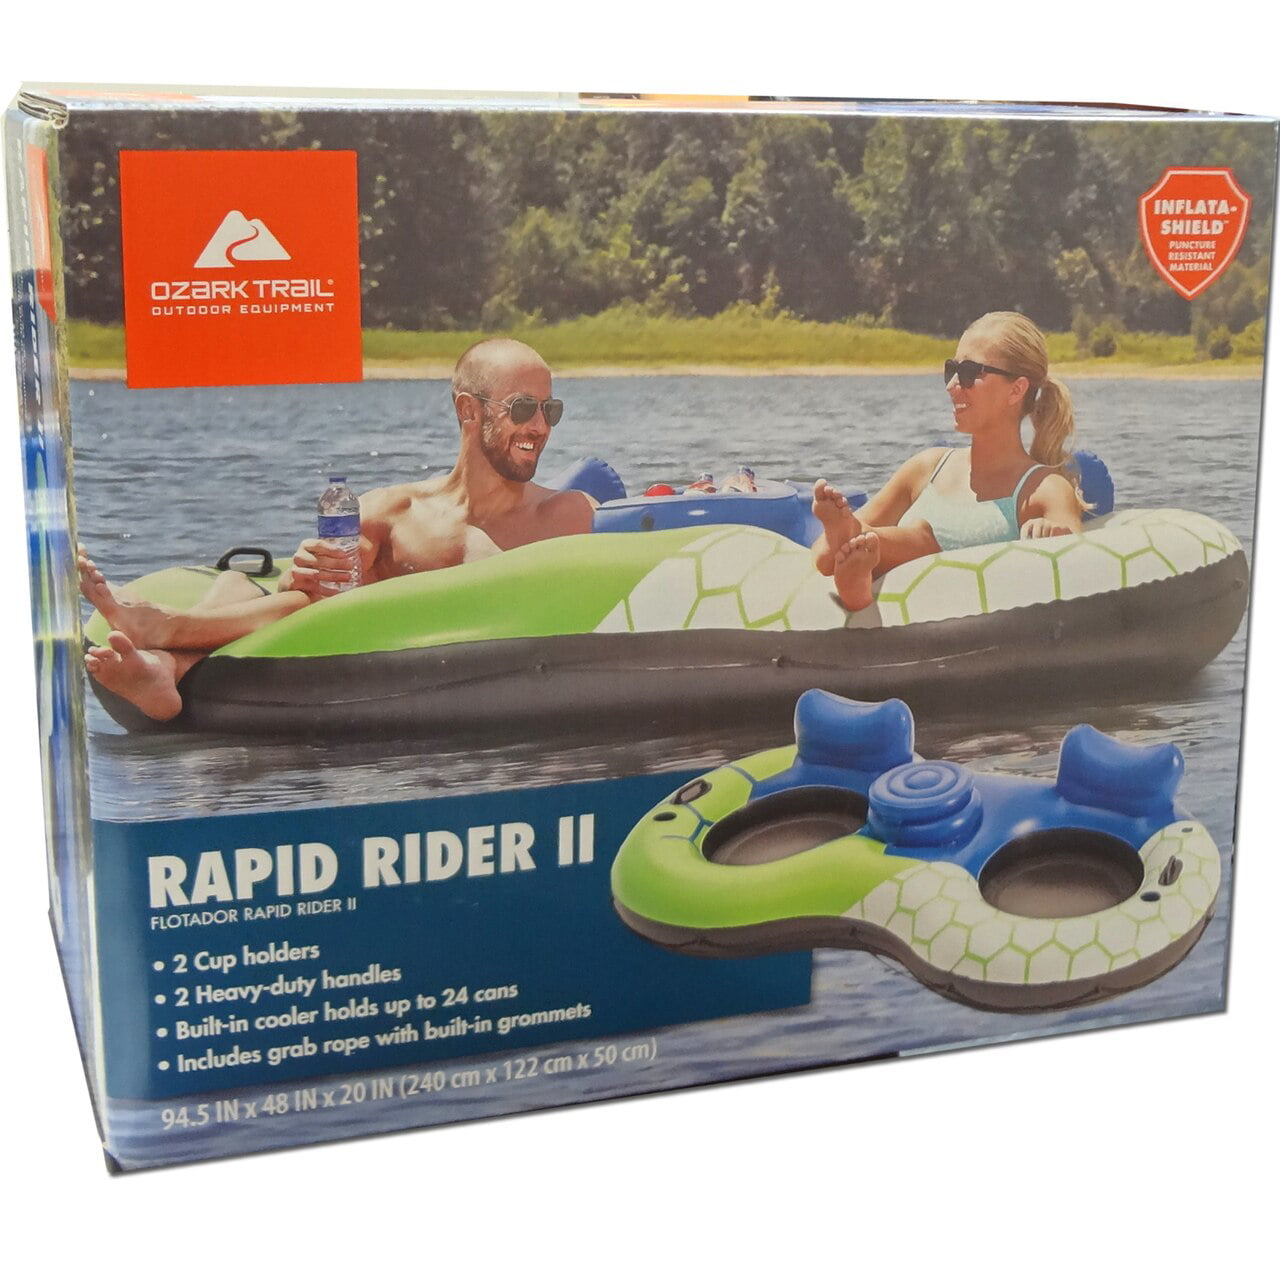 Details about   Ozark Trail Rapid Rider 2 Inflatable Tube 2 Person 24 can drink cooler & extras 